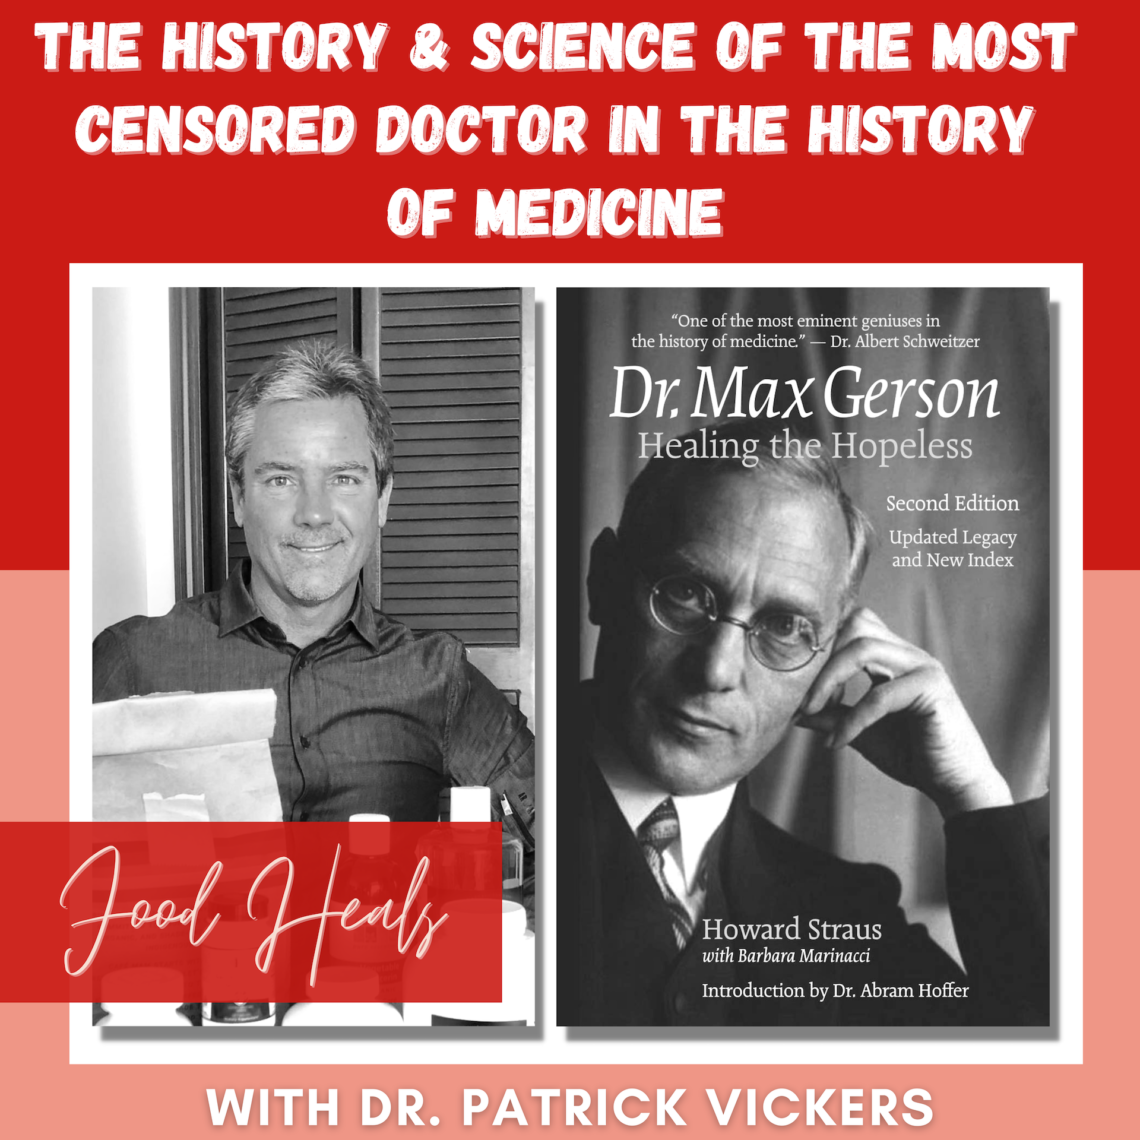 The History & Science of the Most Censored Doctor In the History of Medicine with Dr. Patrick Vickers